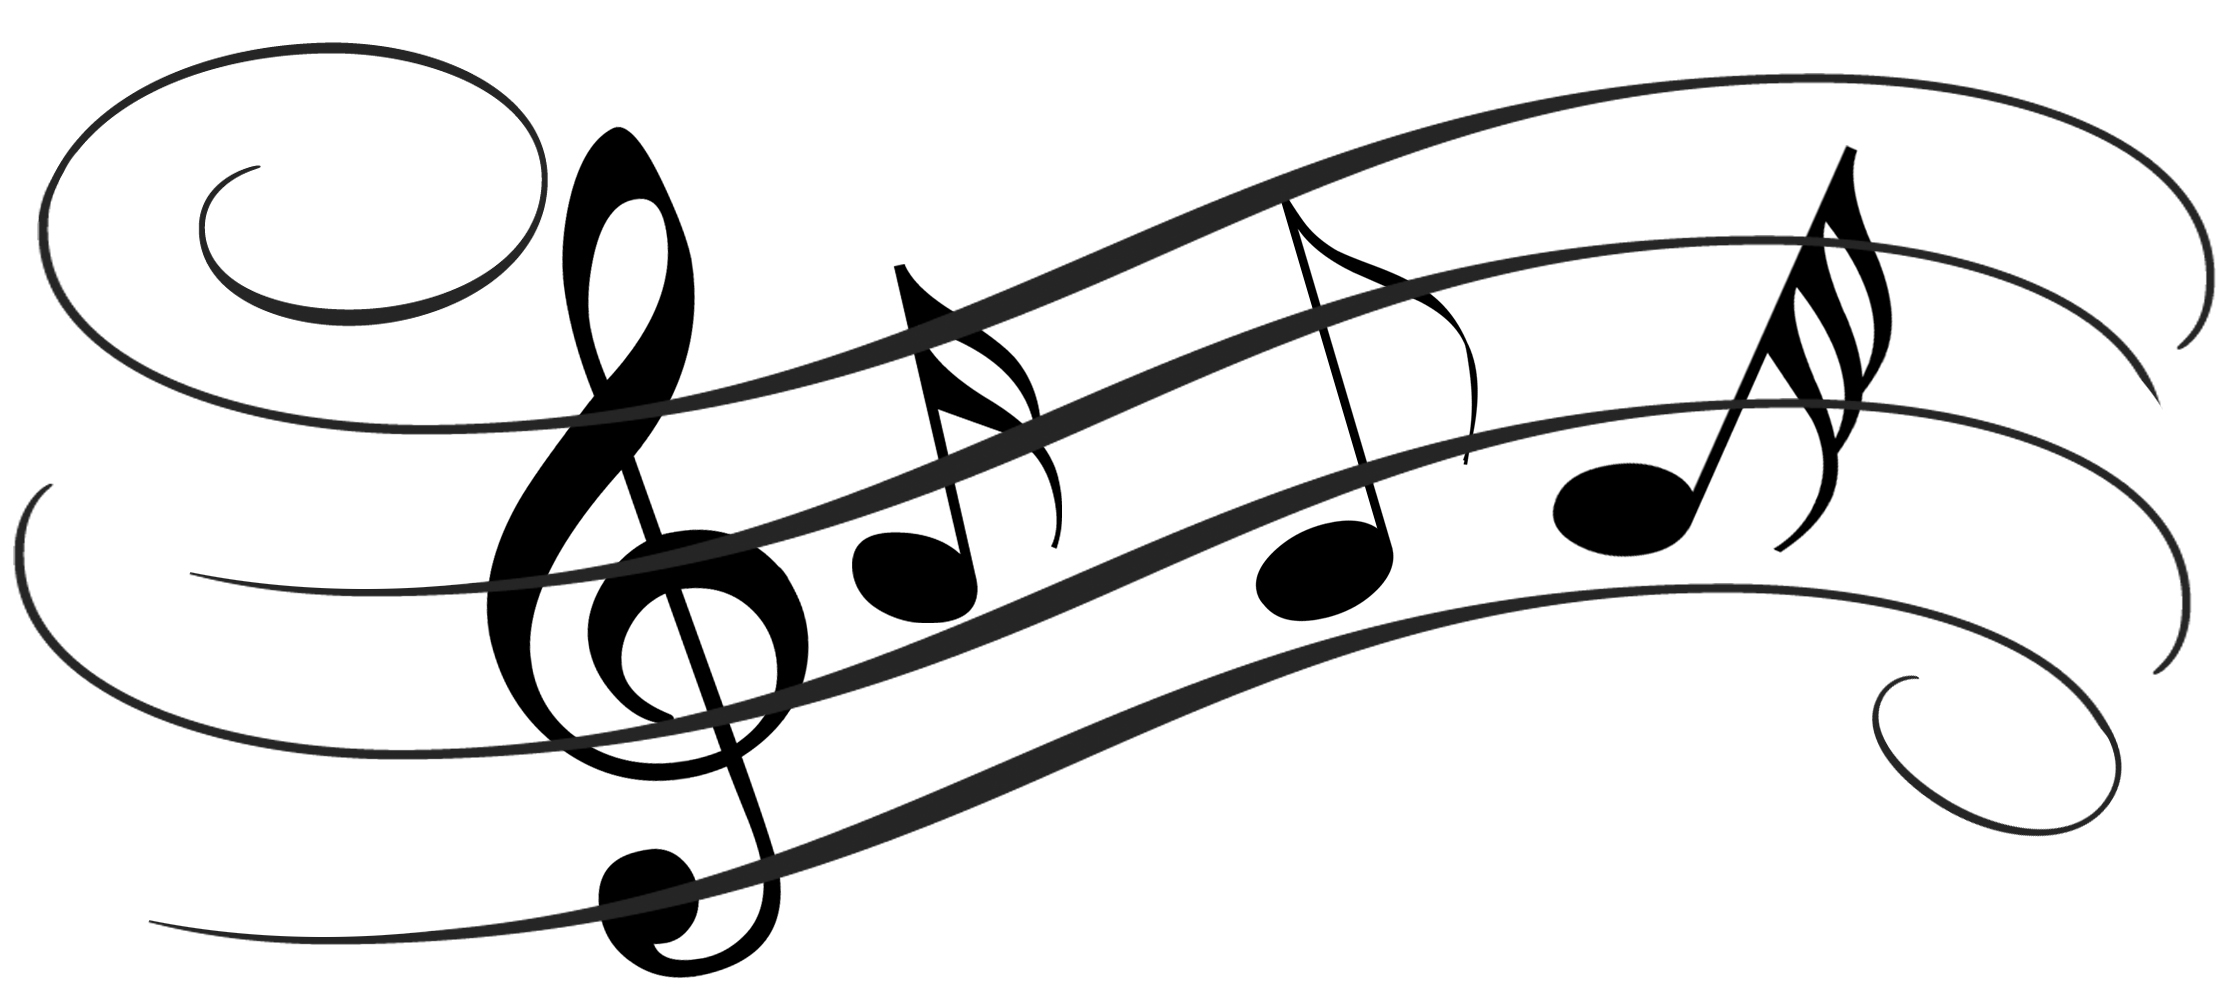 music notes on staff clipart - Music Staff Clipart